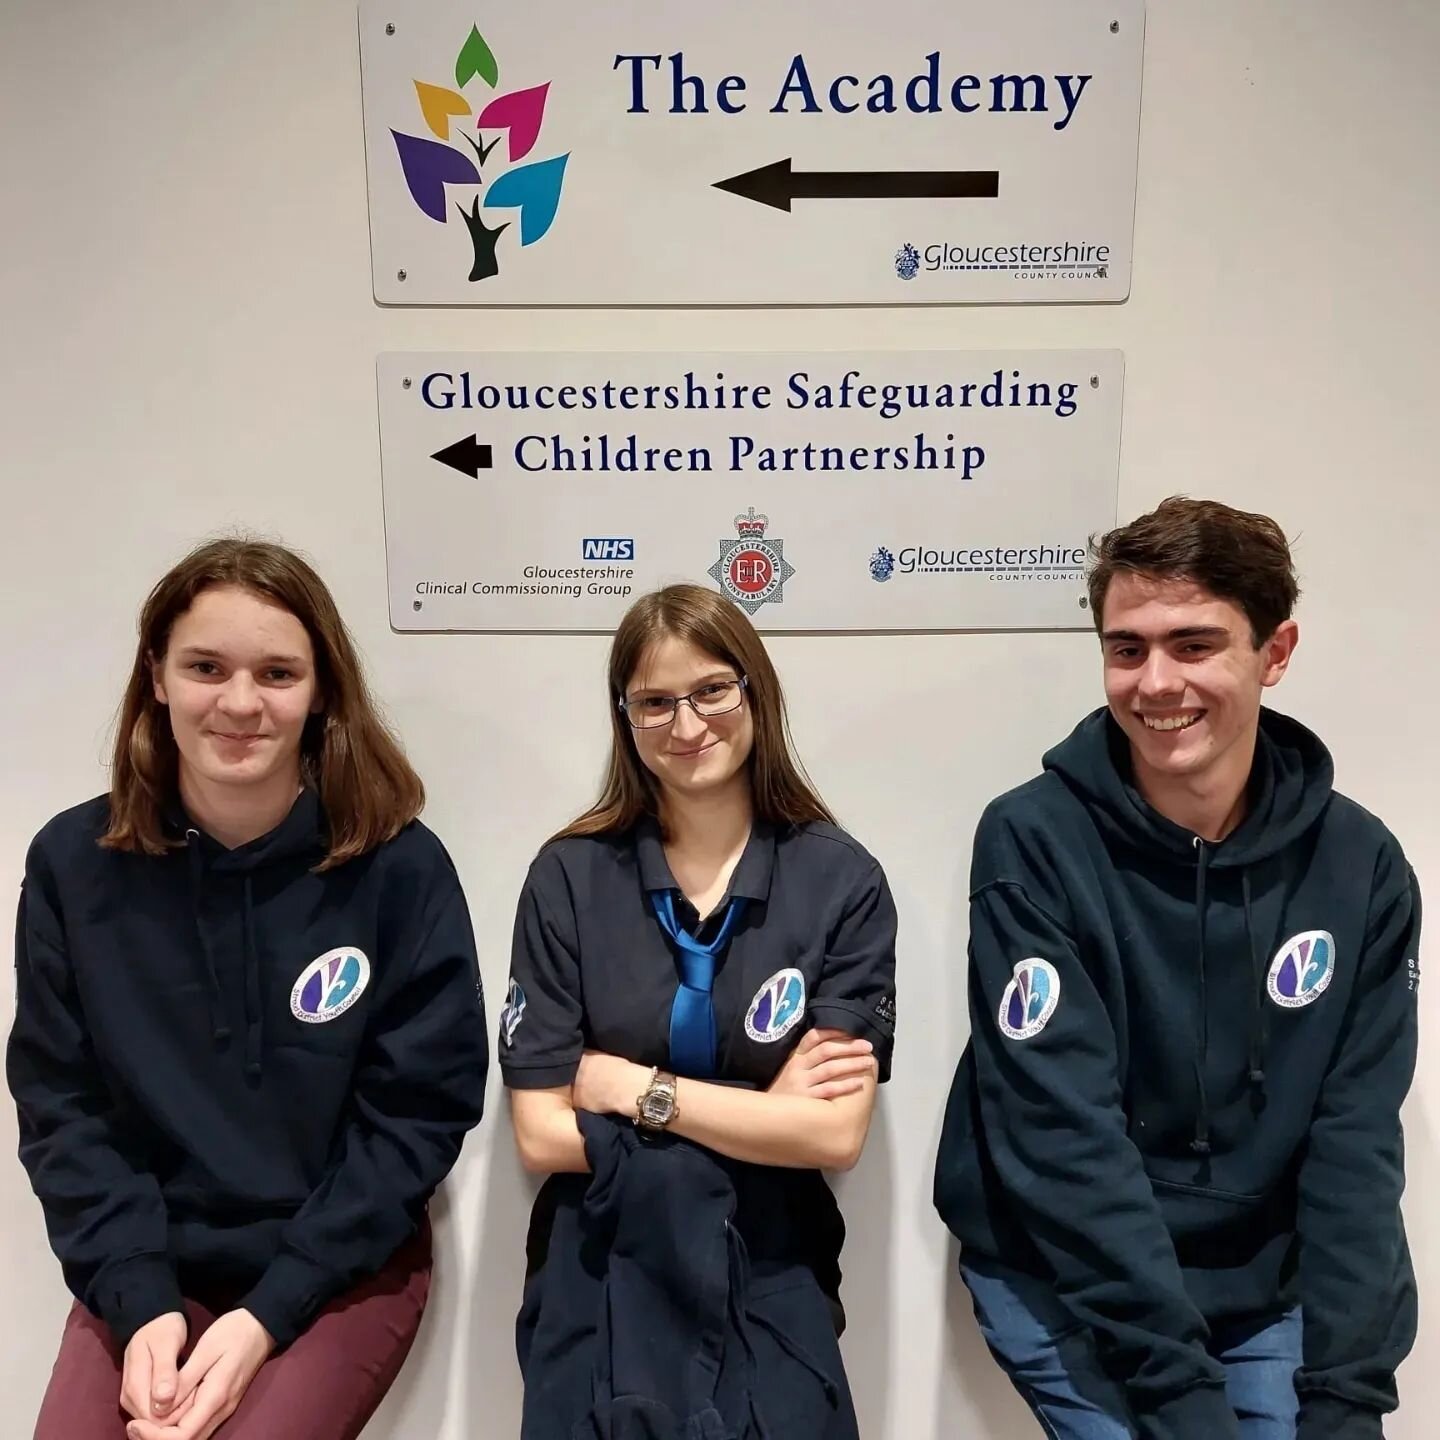 SDYC members Brandon, Alyssa, Cate &amp; Megan (not pictured) were at The Academy, Quayside House Gloucester yesterday. This was for Gloucestershire Safeguarding Children's Partnership Annual Section 11 Audit Panel session - a great day of #youthvoic